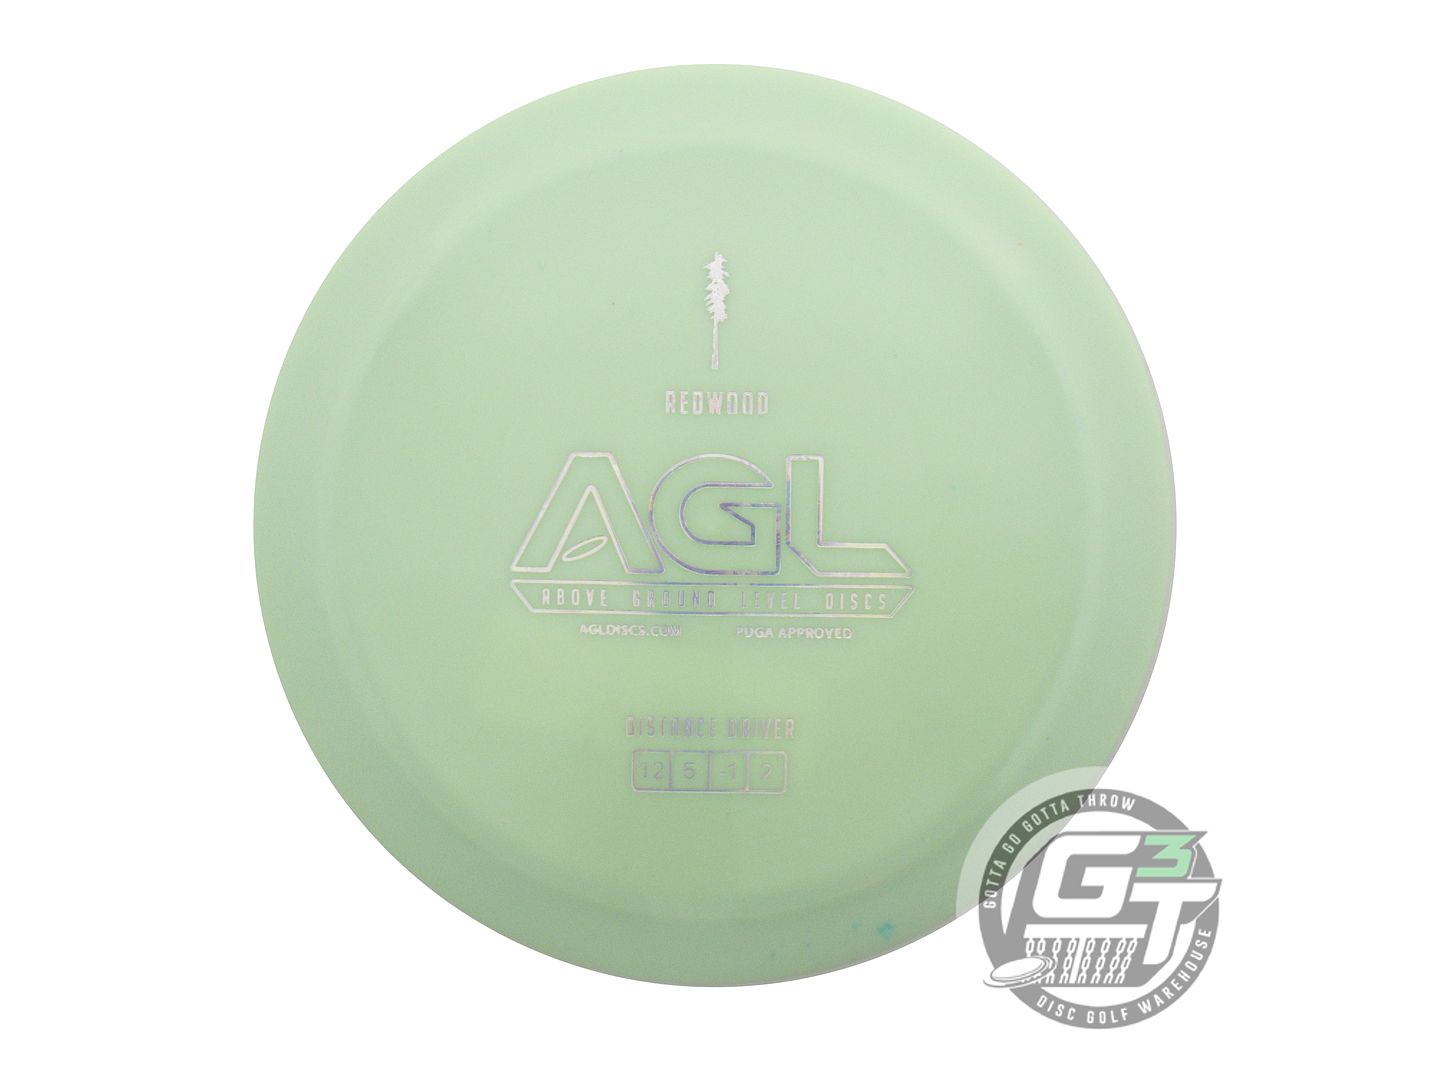 Above Ground Level Glow Alpine Redwood Distance Driver Golf Disc (Individually Listed)